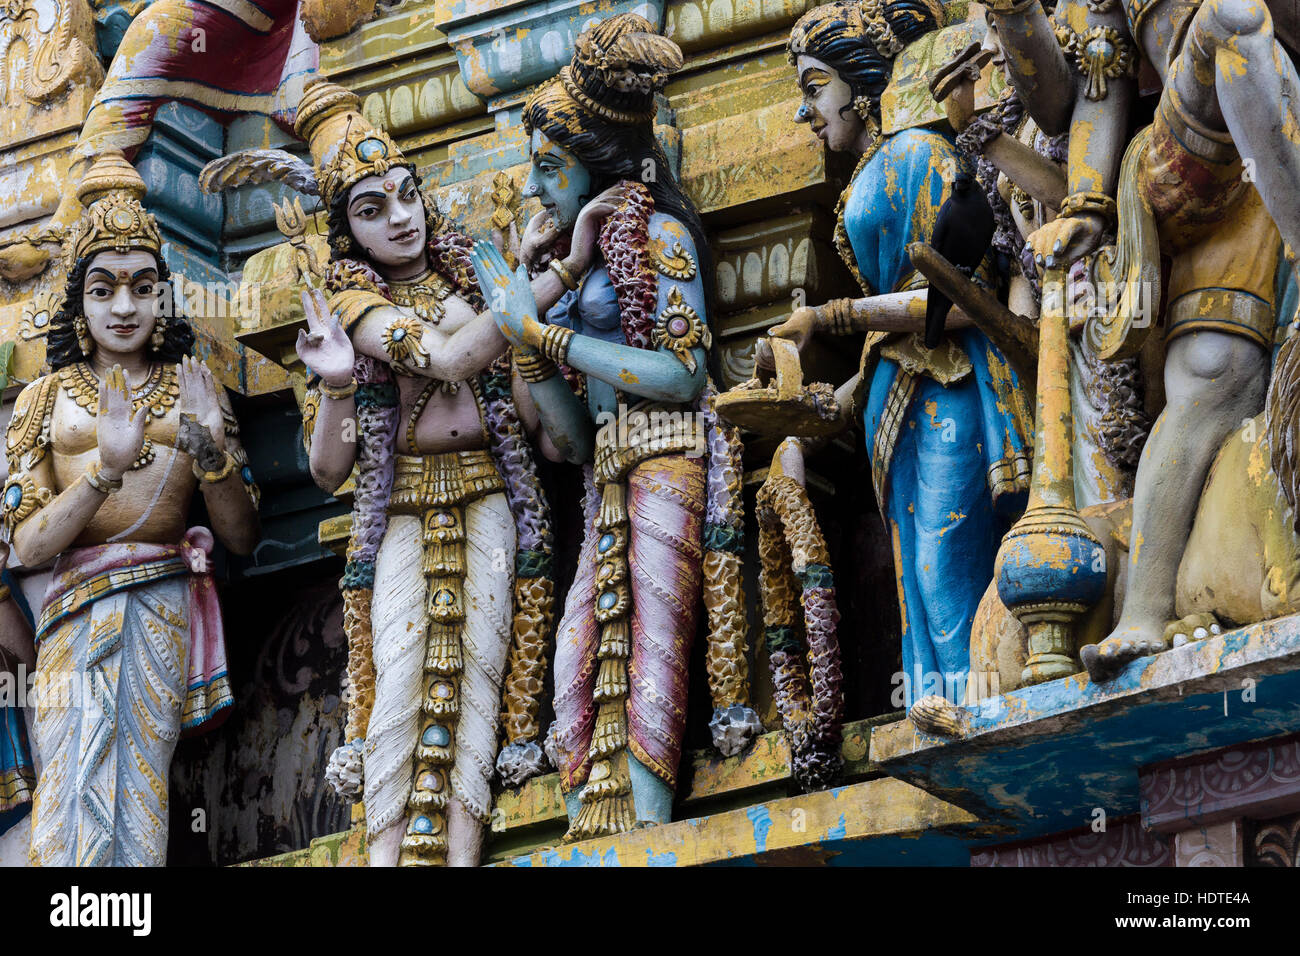 Closeup details on the tower of a Hindu Temple dedicated to Lord Shiva in Colombo, Sri Lanka. Stock Photo